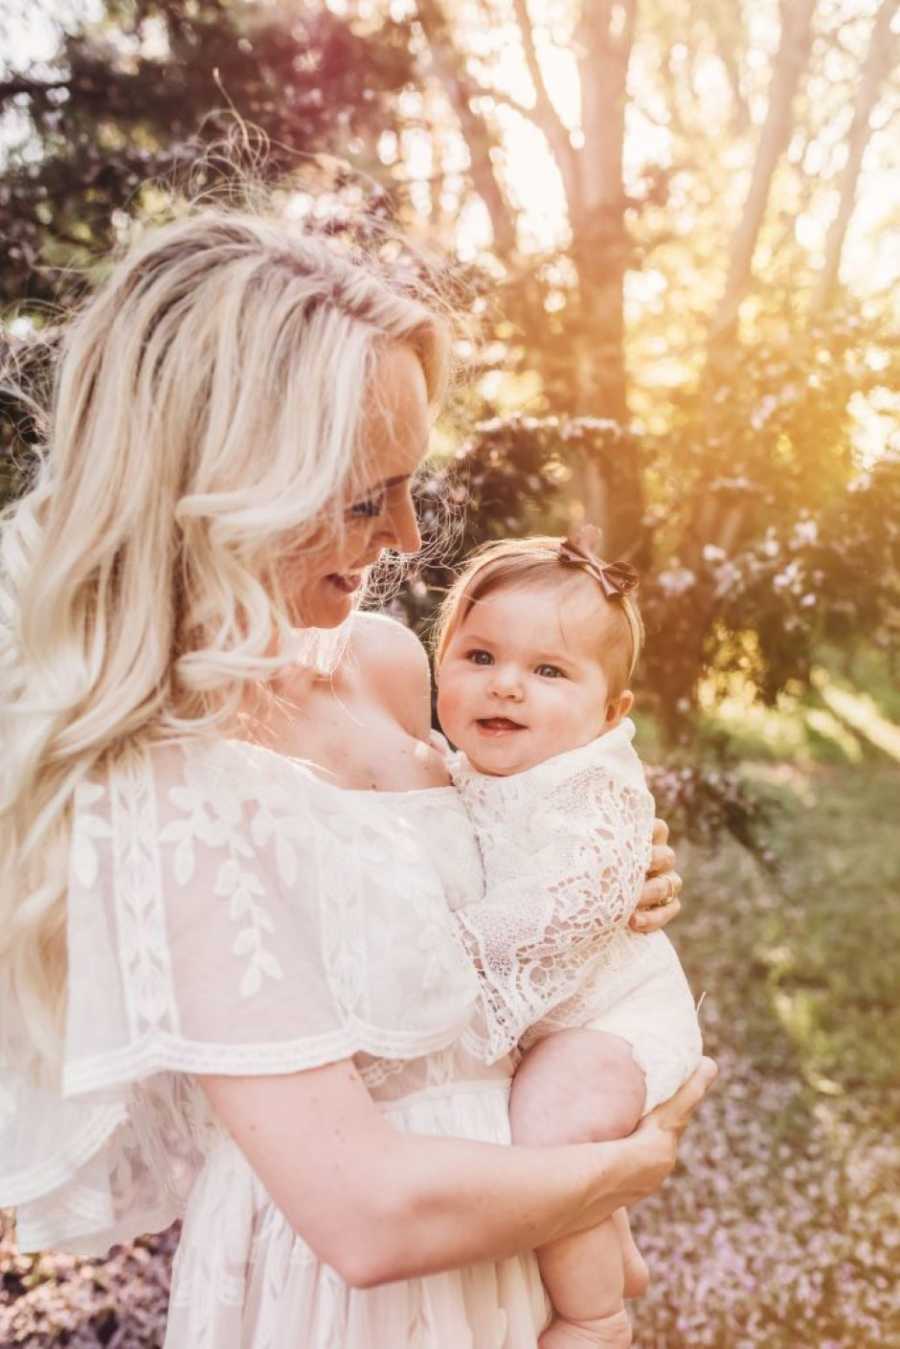 Mom smiles down at smiling baby daughter during outside photoshoot